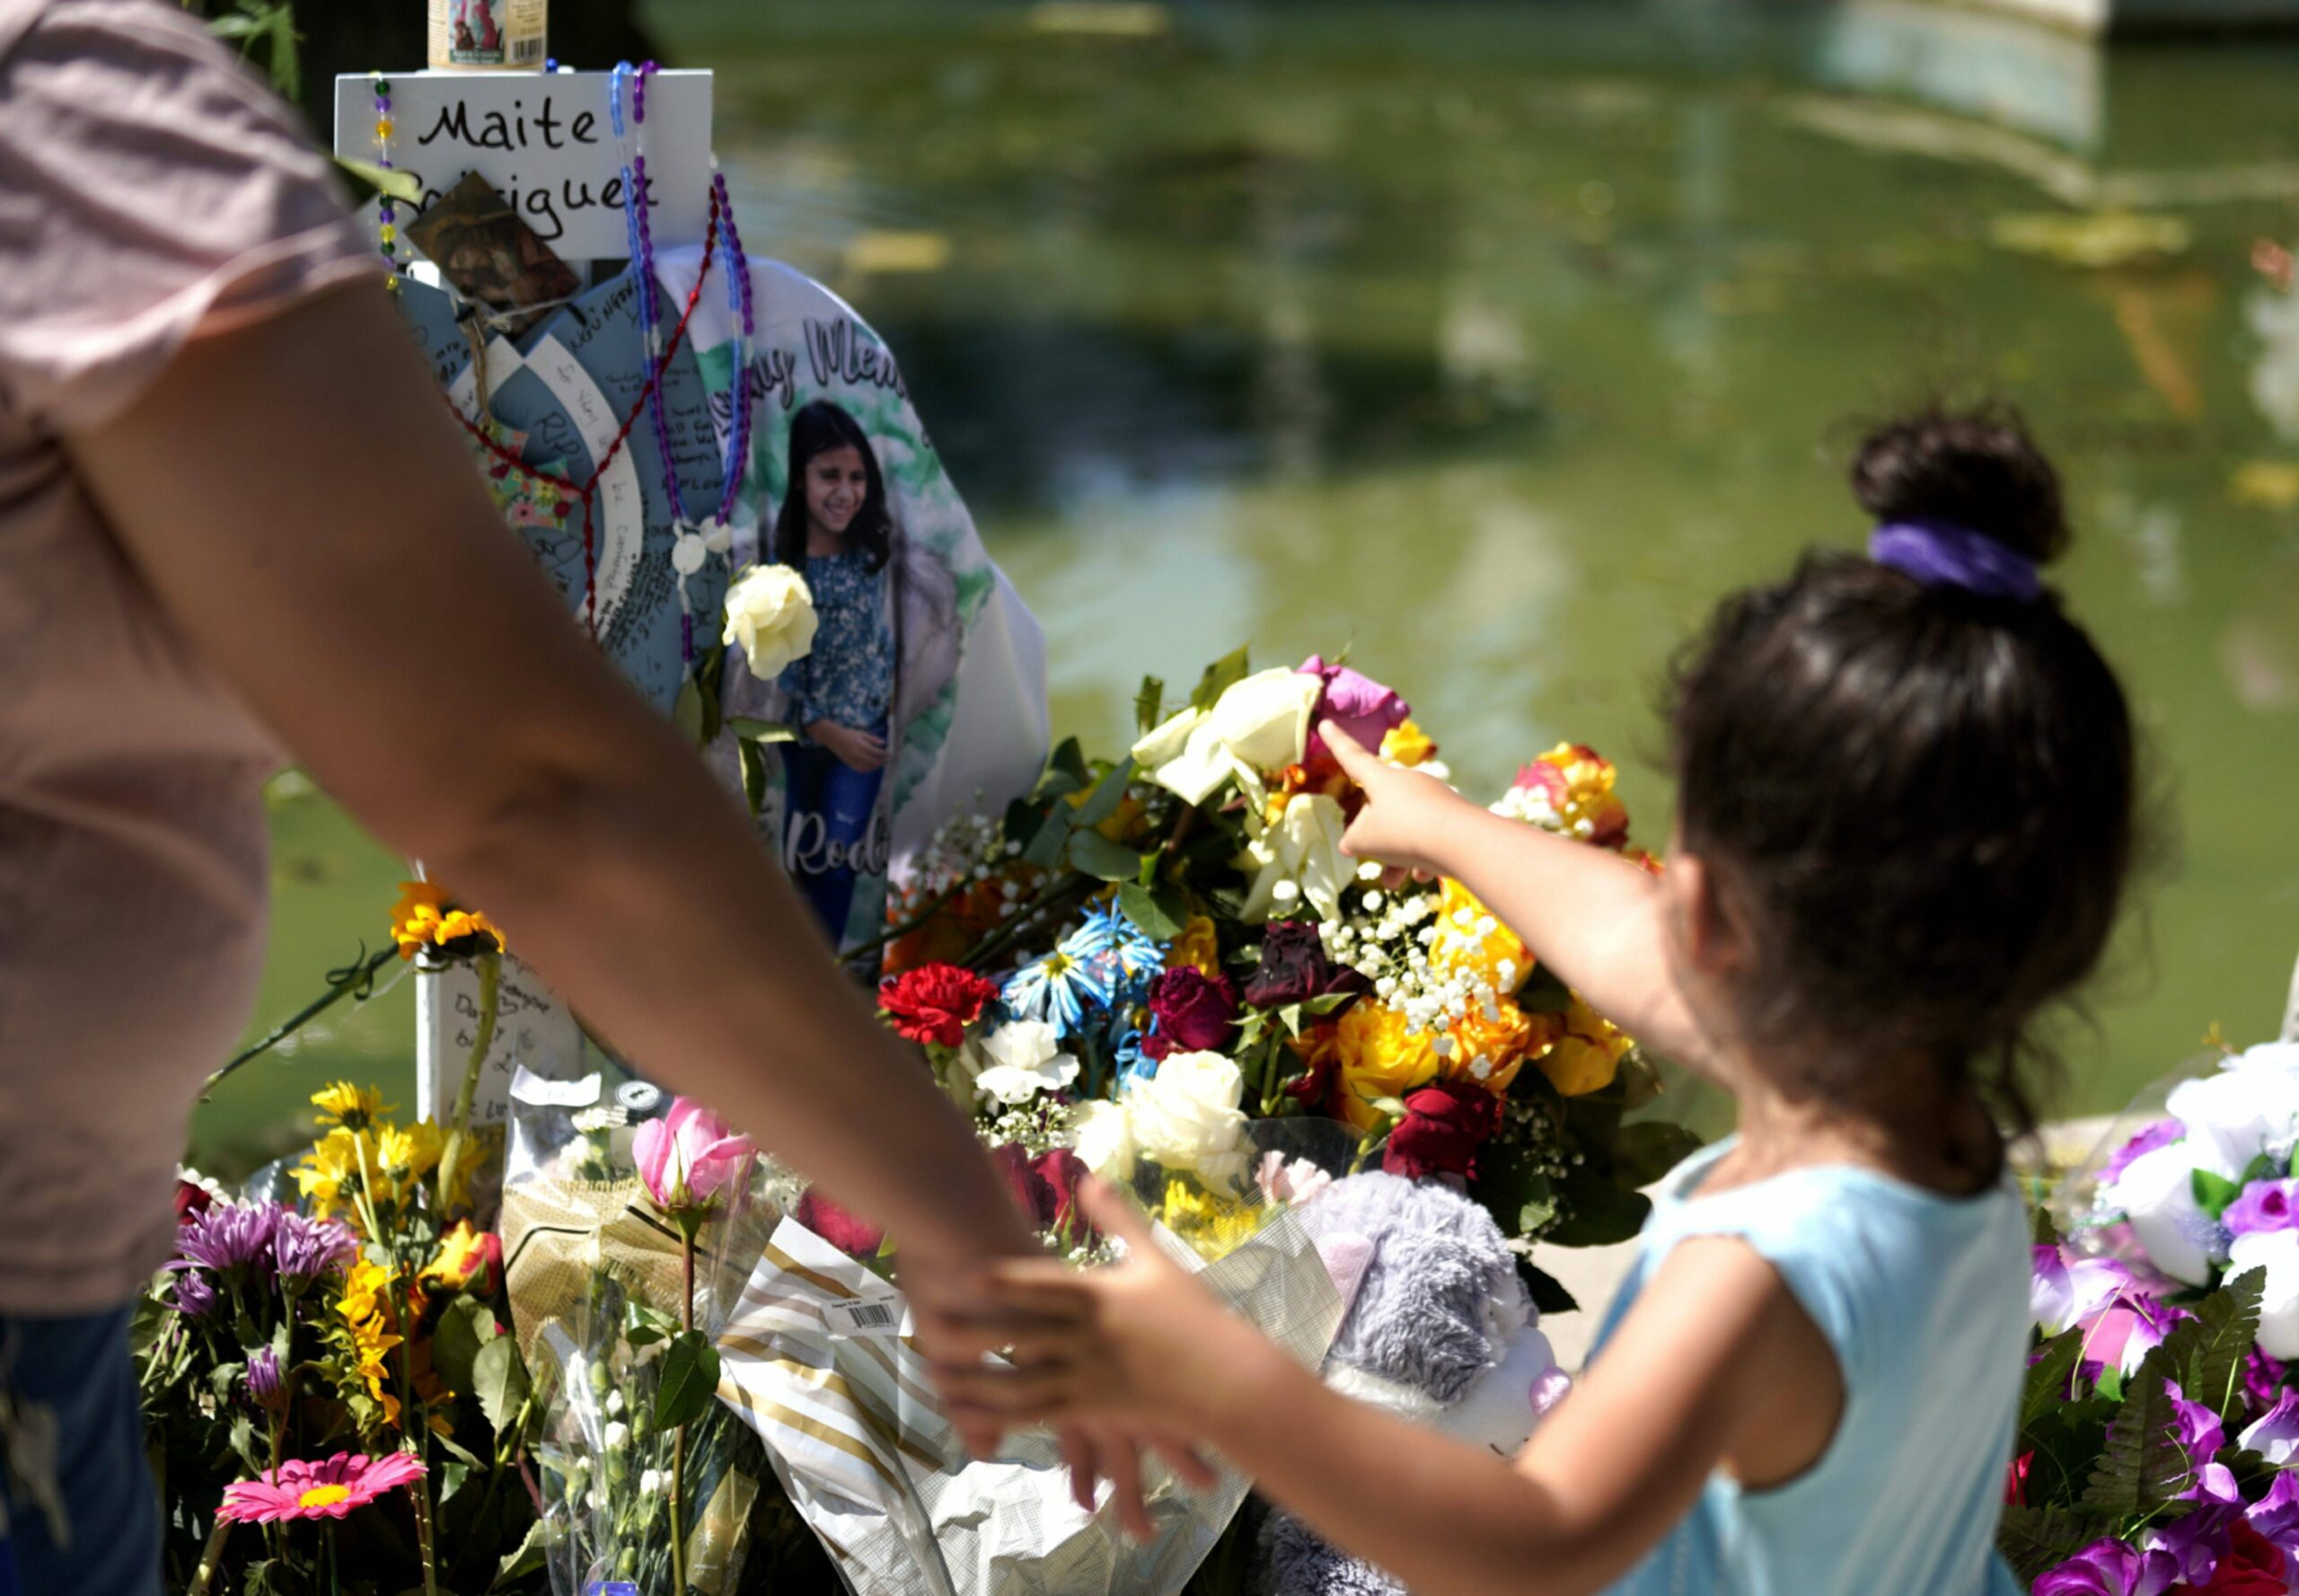 People mourn for victims of a school mass shooting at Town Square in Uvalde, Texas.